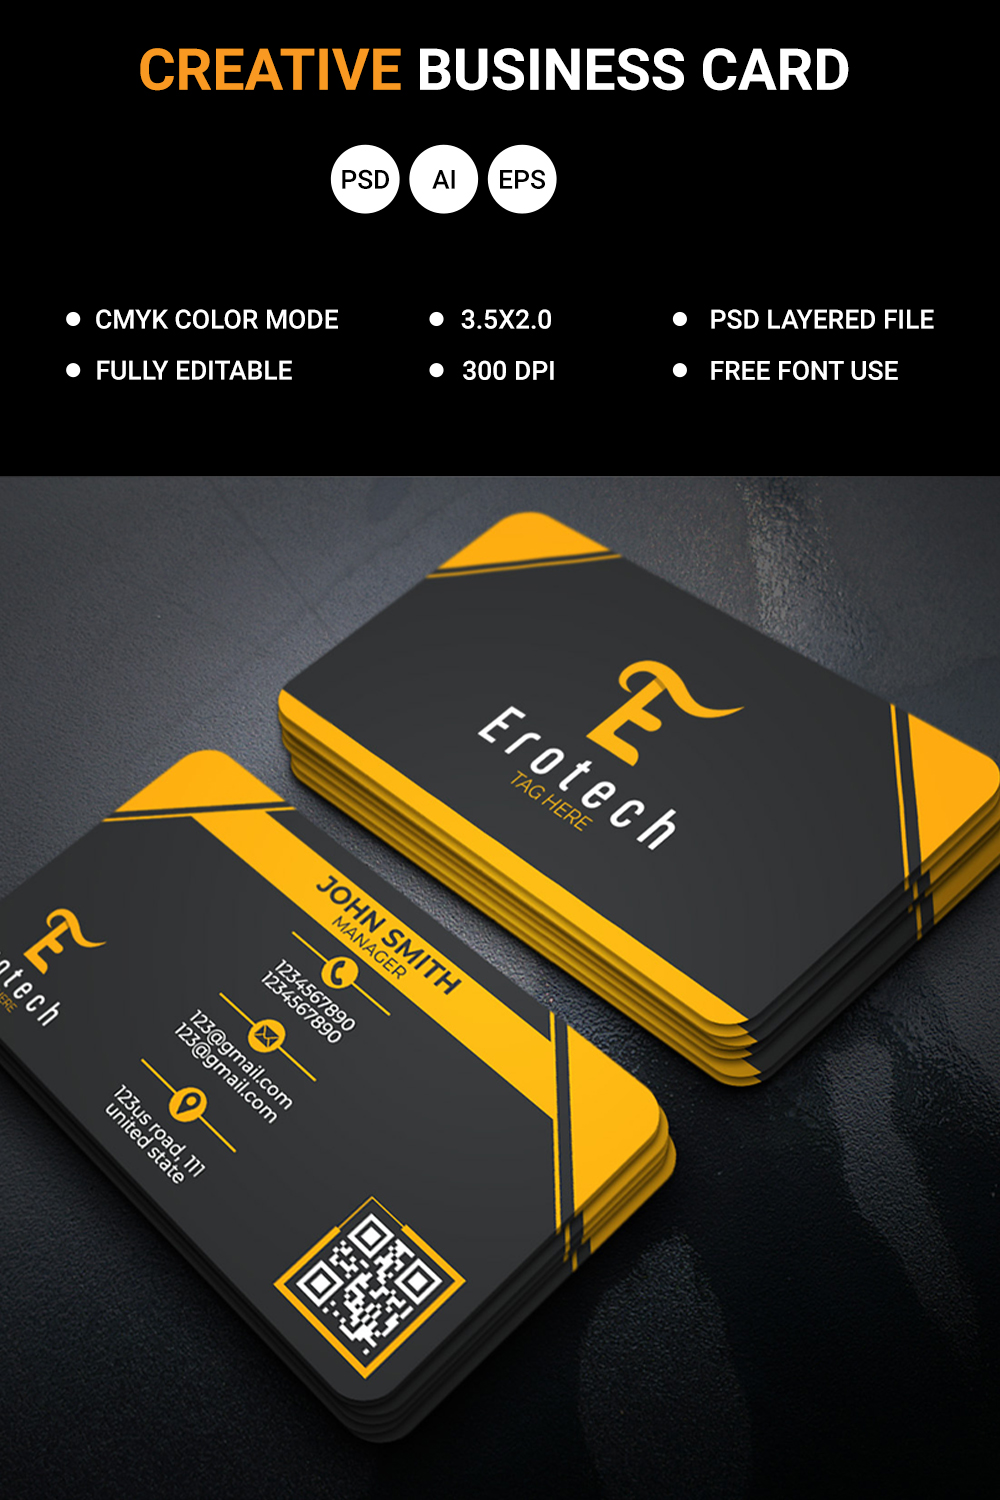 Professional and creative business card design template psd file, ai file, eps file pinterest preview image.